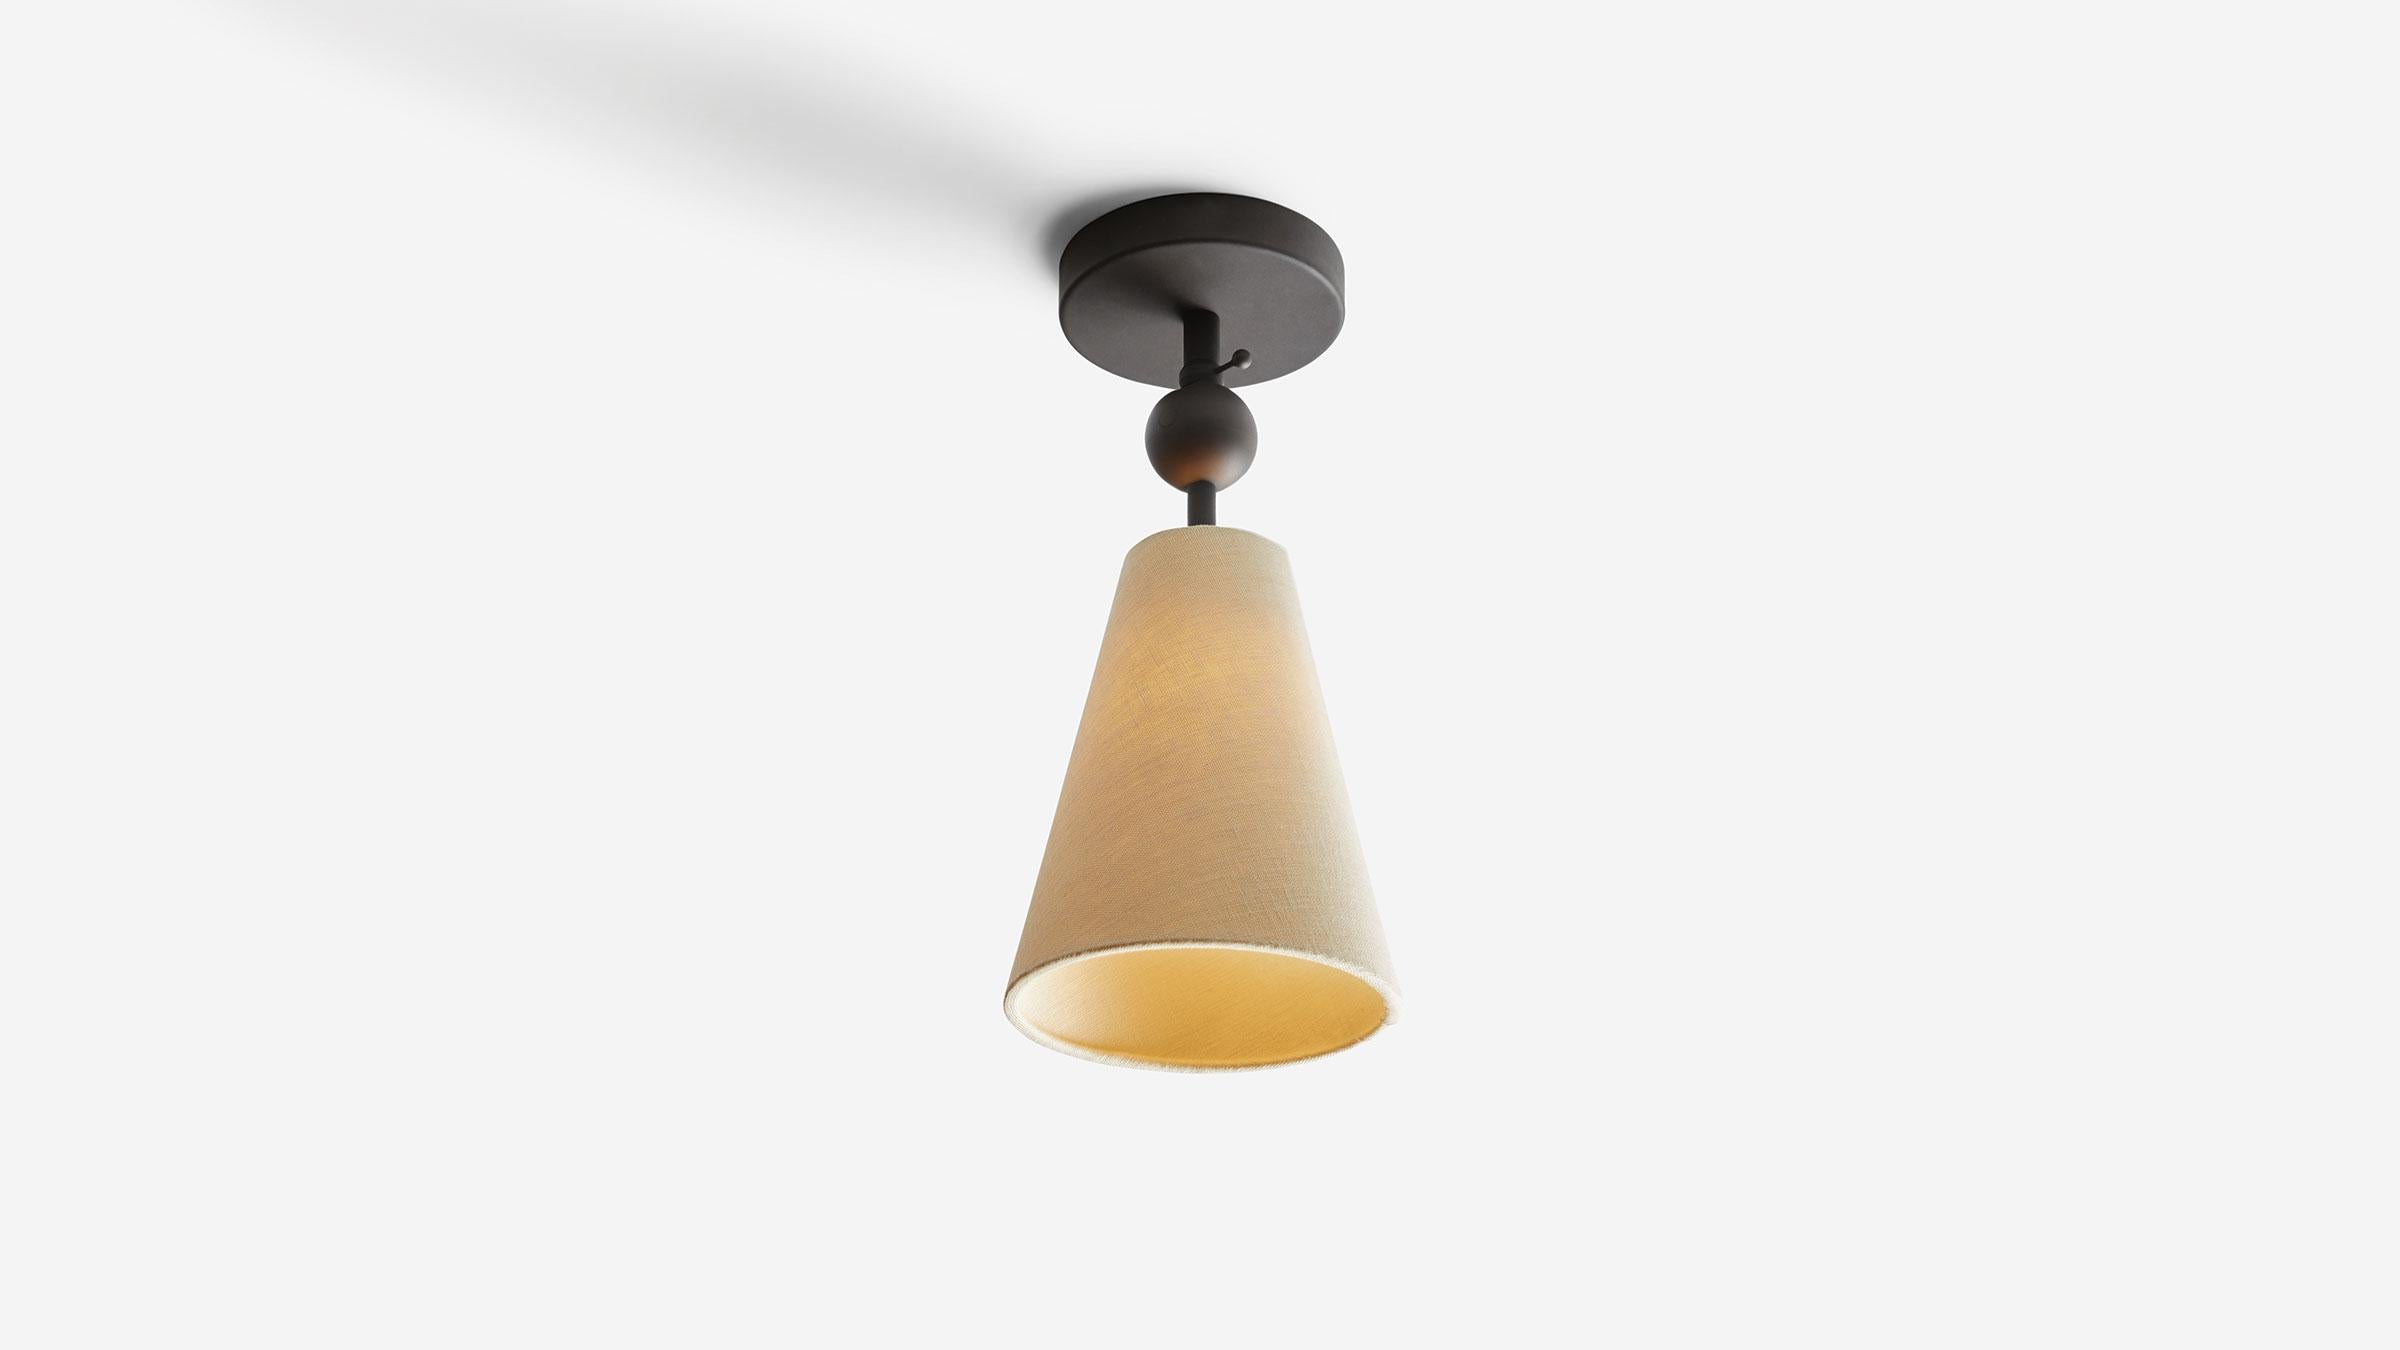 Pendolo Flush Mount is a versatile flush-mount fixture, capable of serving as a down-light or directional wall washer. Available in either Natural Burlap or Natural Linen, the cone form is expressed as a singular gesture against a ceiling. UL